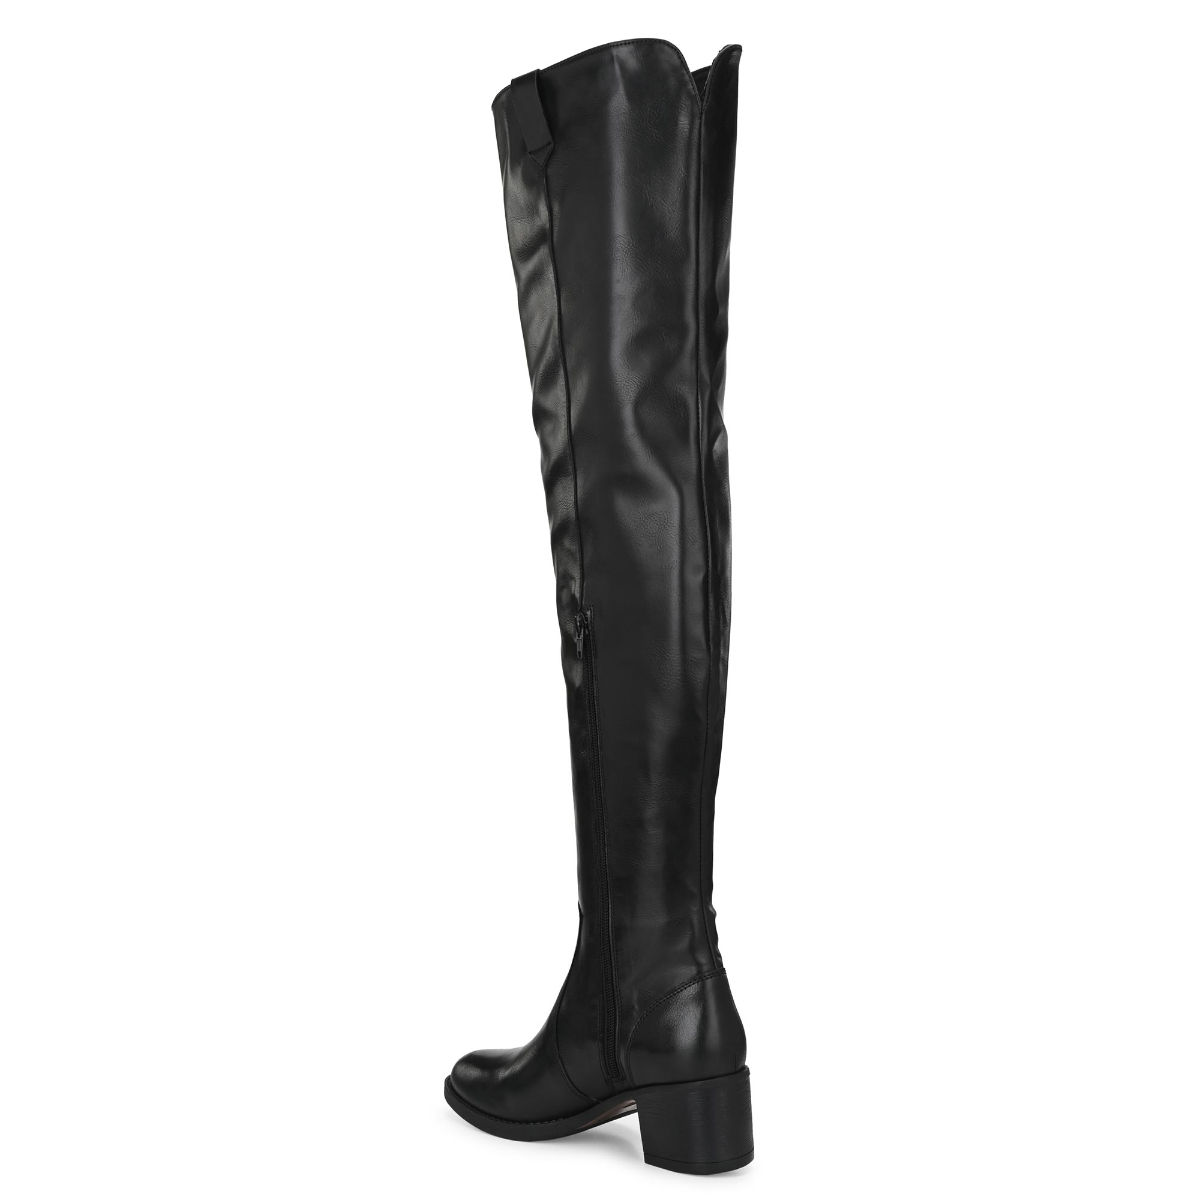 Delize Womens Black Thigh High Boots: Buy Delize Womens Black Thigh ...